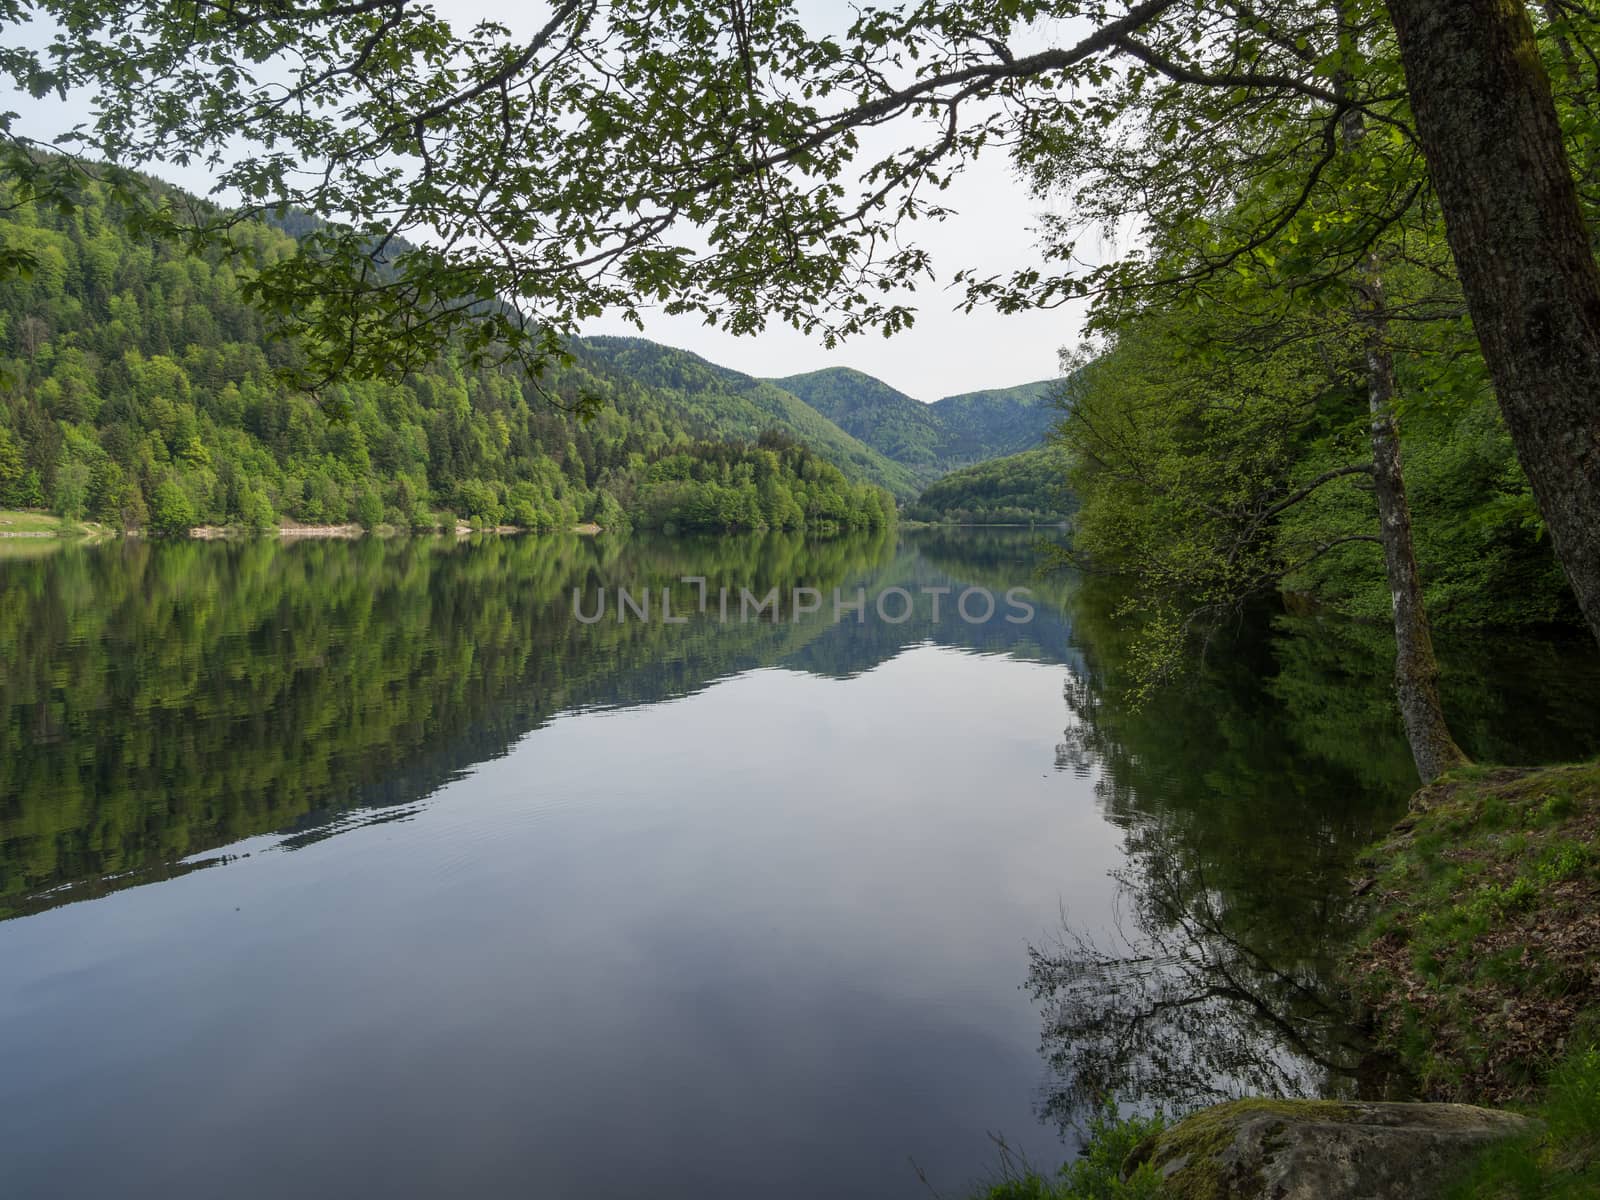 Early morning calm on lac du Kruth-Wildenstein looking over the lake through lush green vegetation